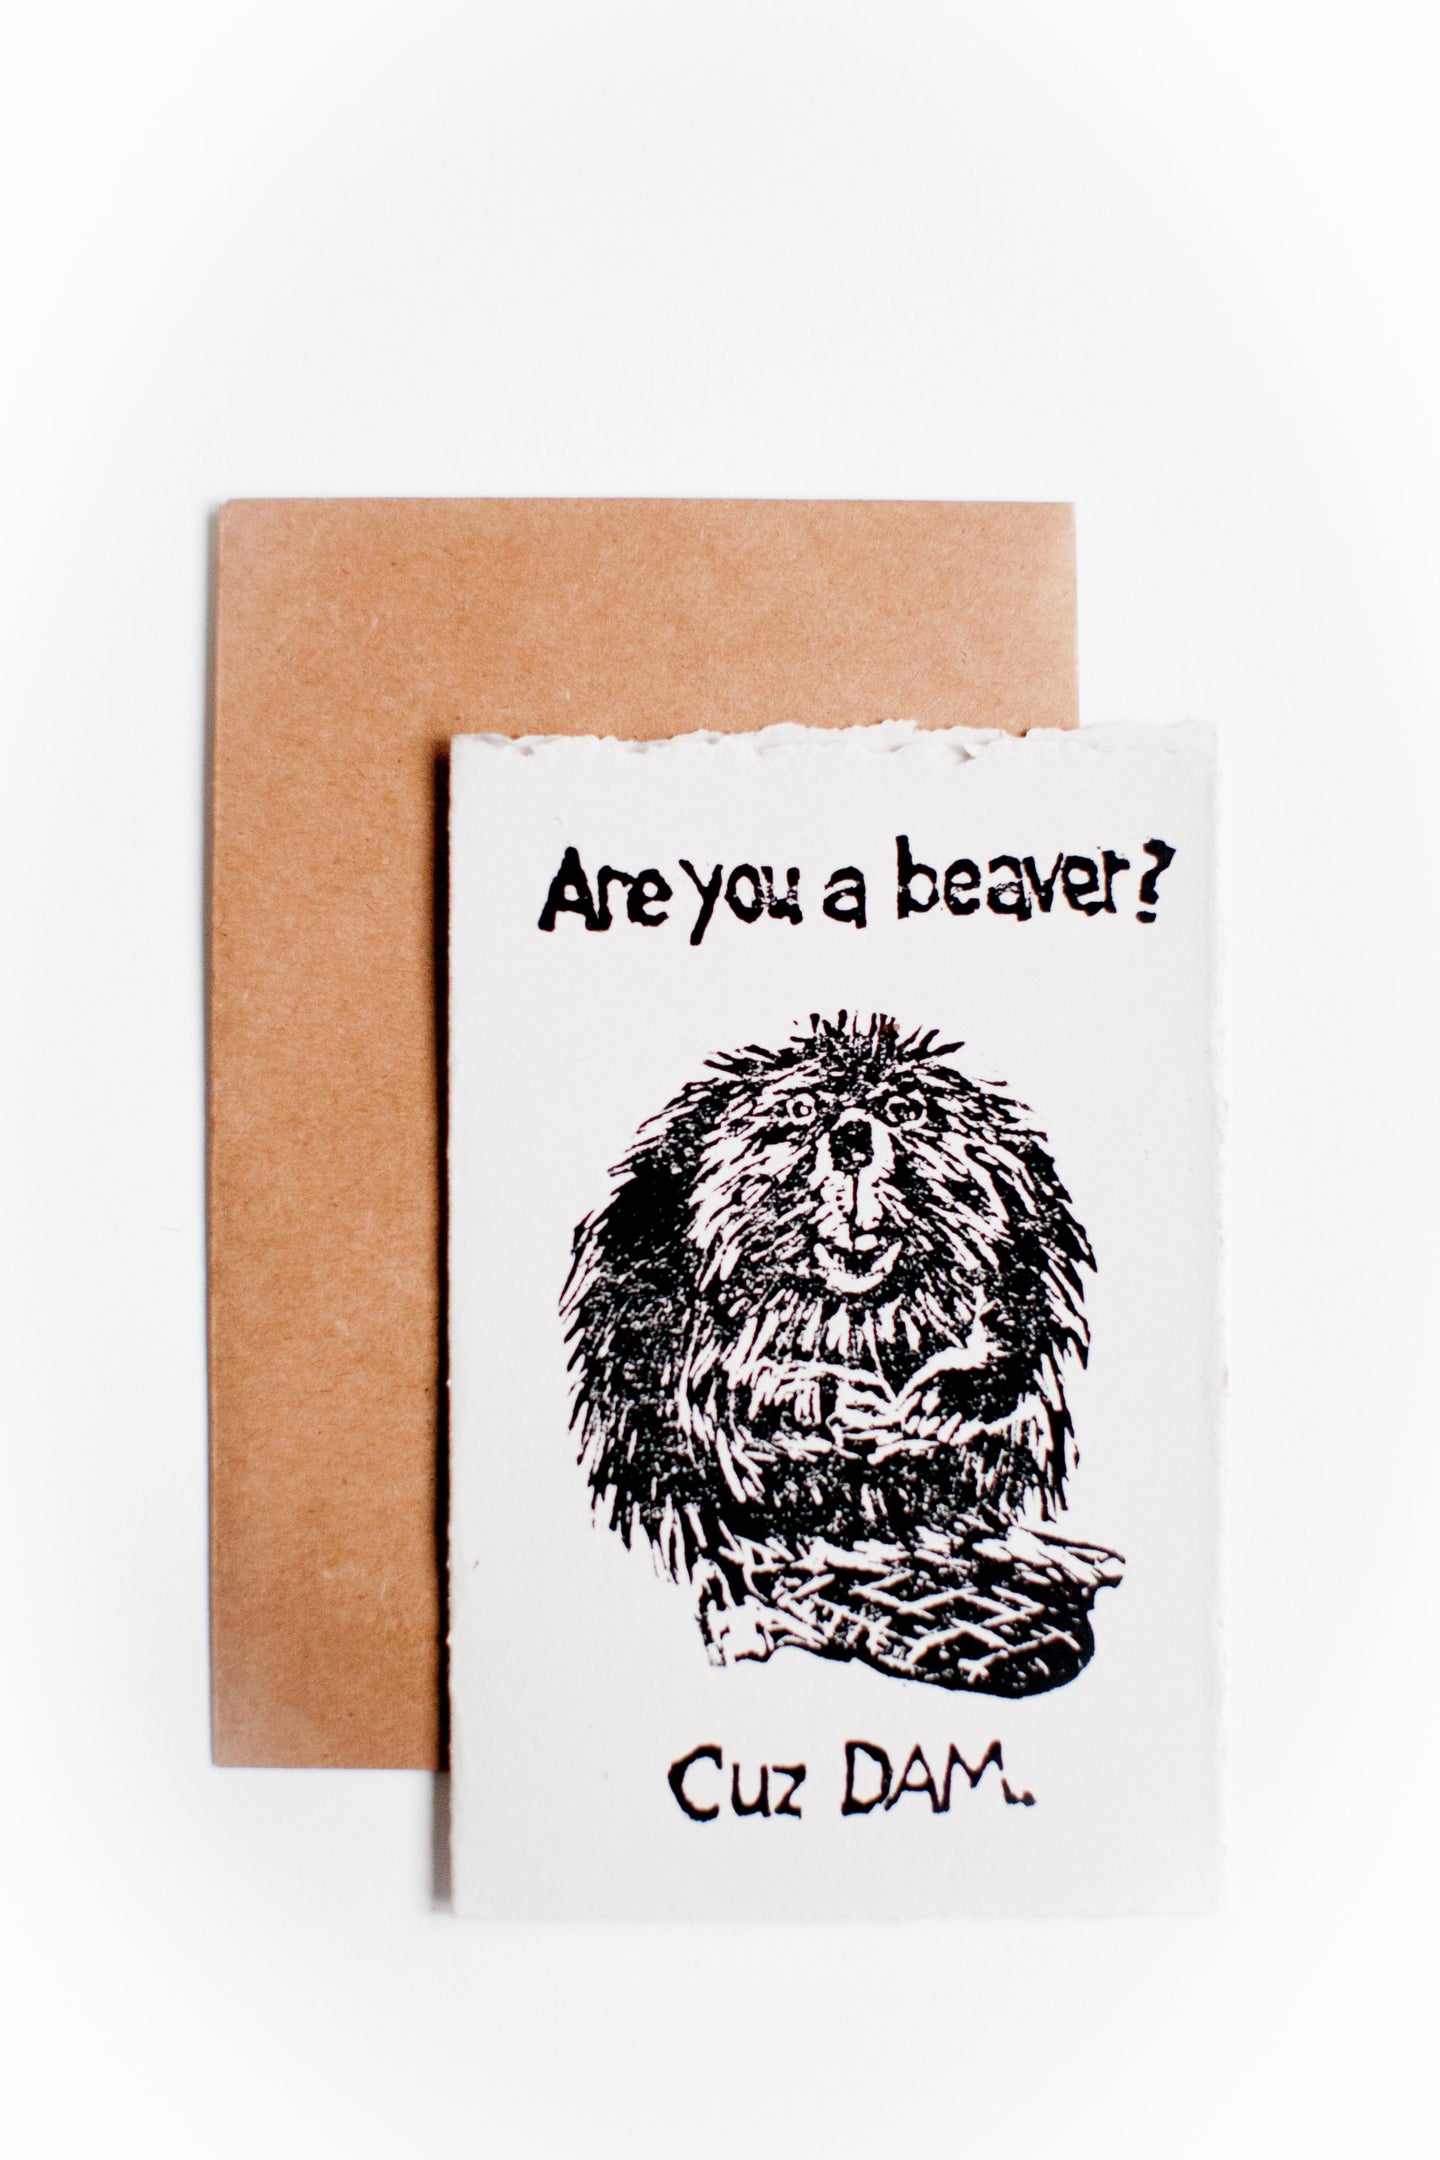 card and envelope, "are you a beaver? cuz dam" picture of beaver"